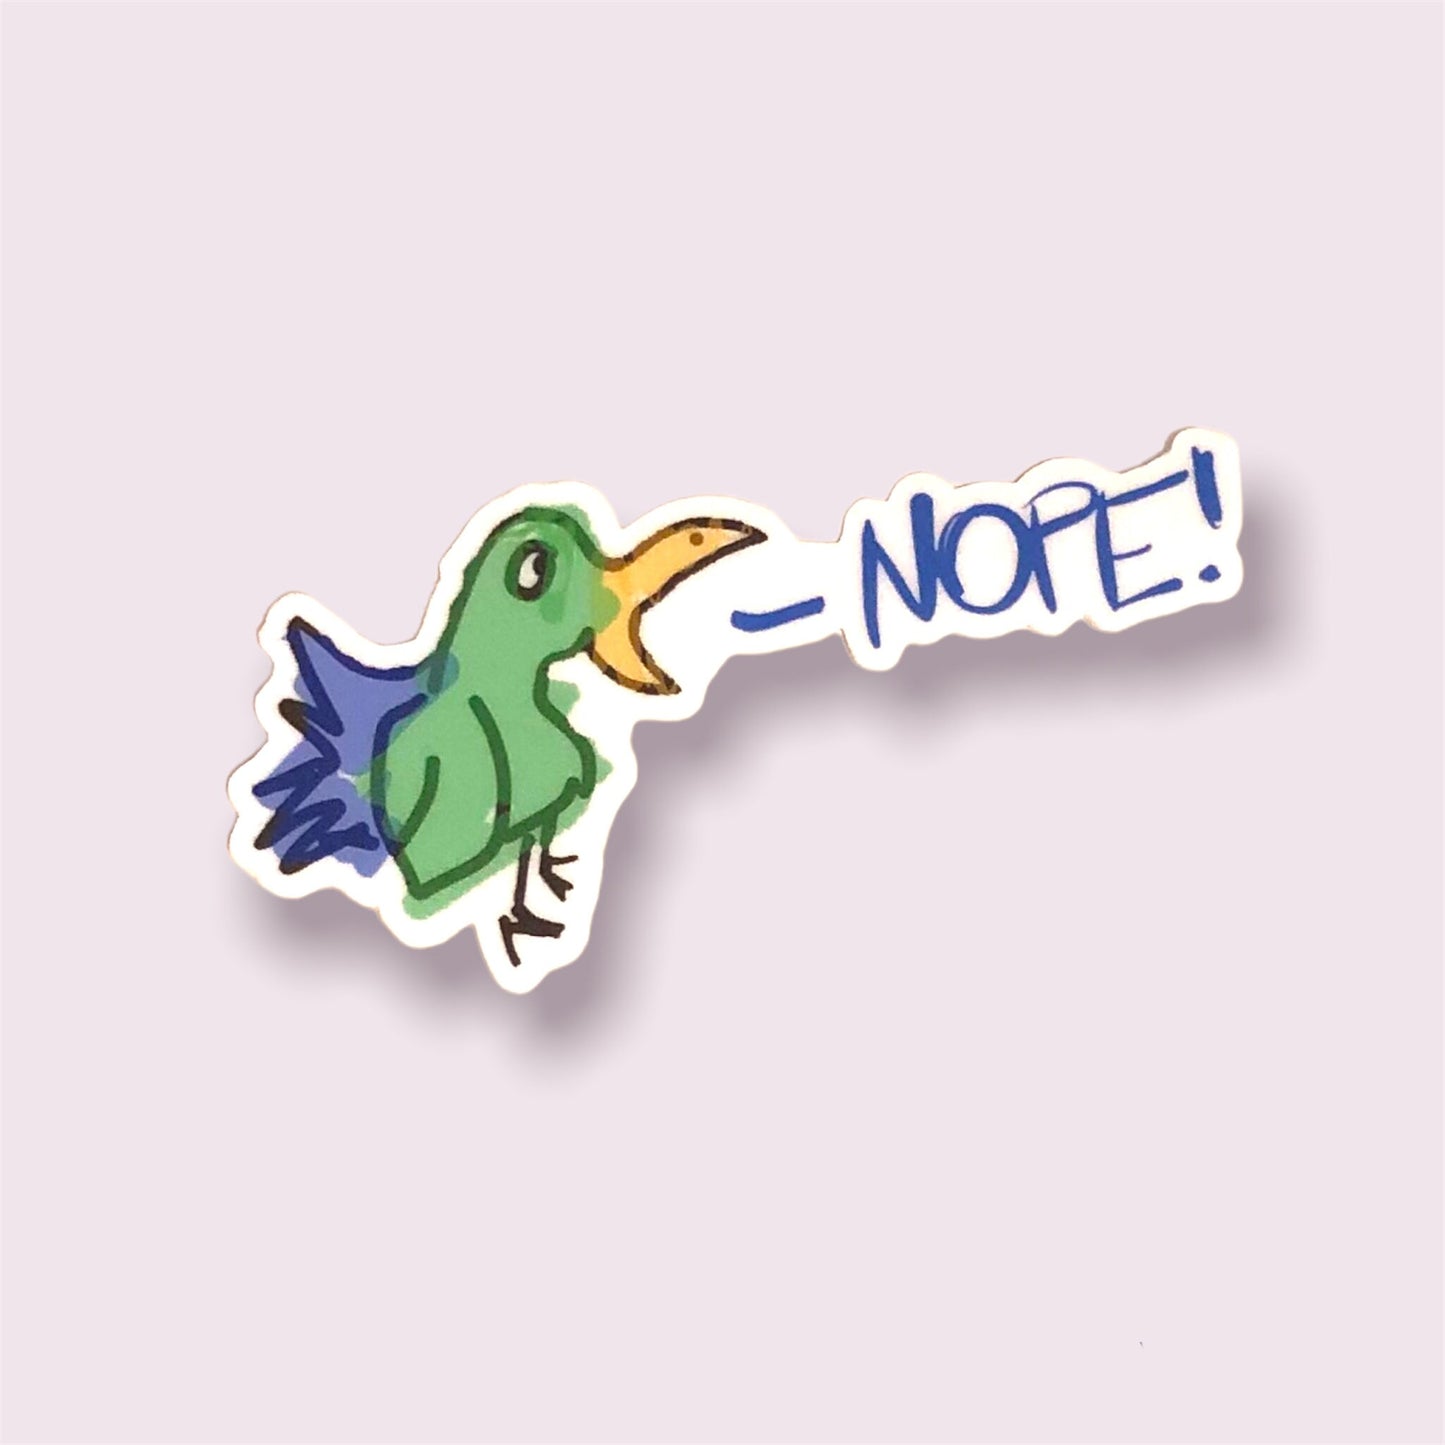 bird sticker, funny cartoon stickers, ironic vinyl stickers for laptop, nope stickers, humorous planner stickers, stickers for water bottle